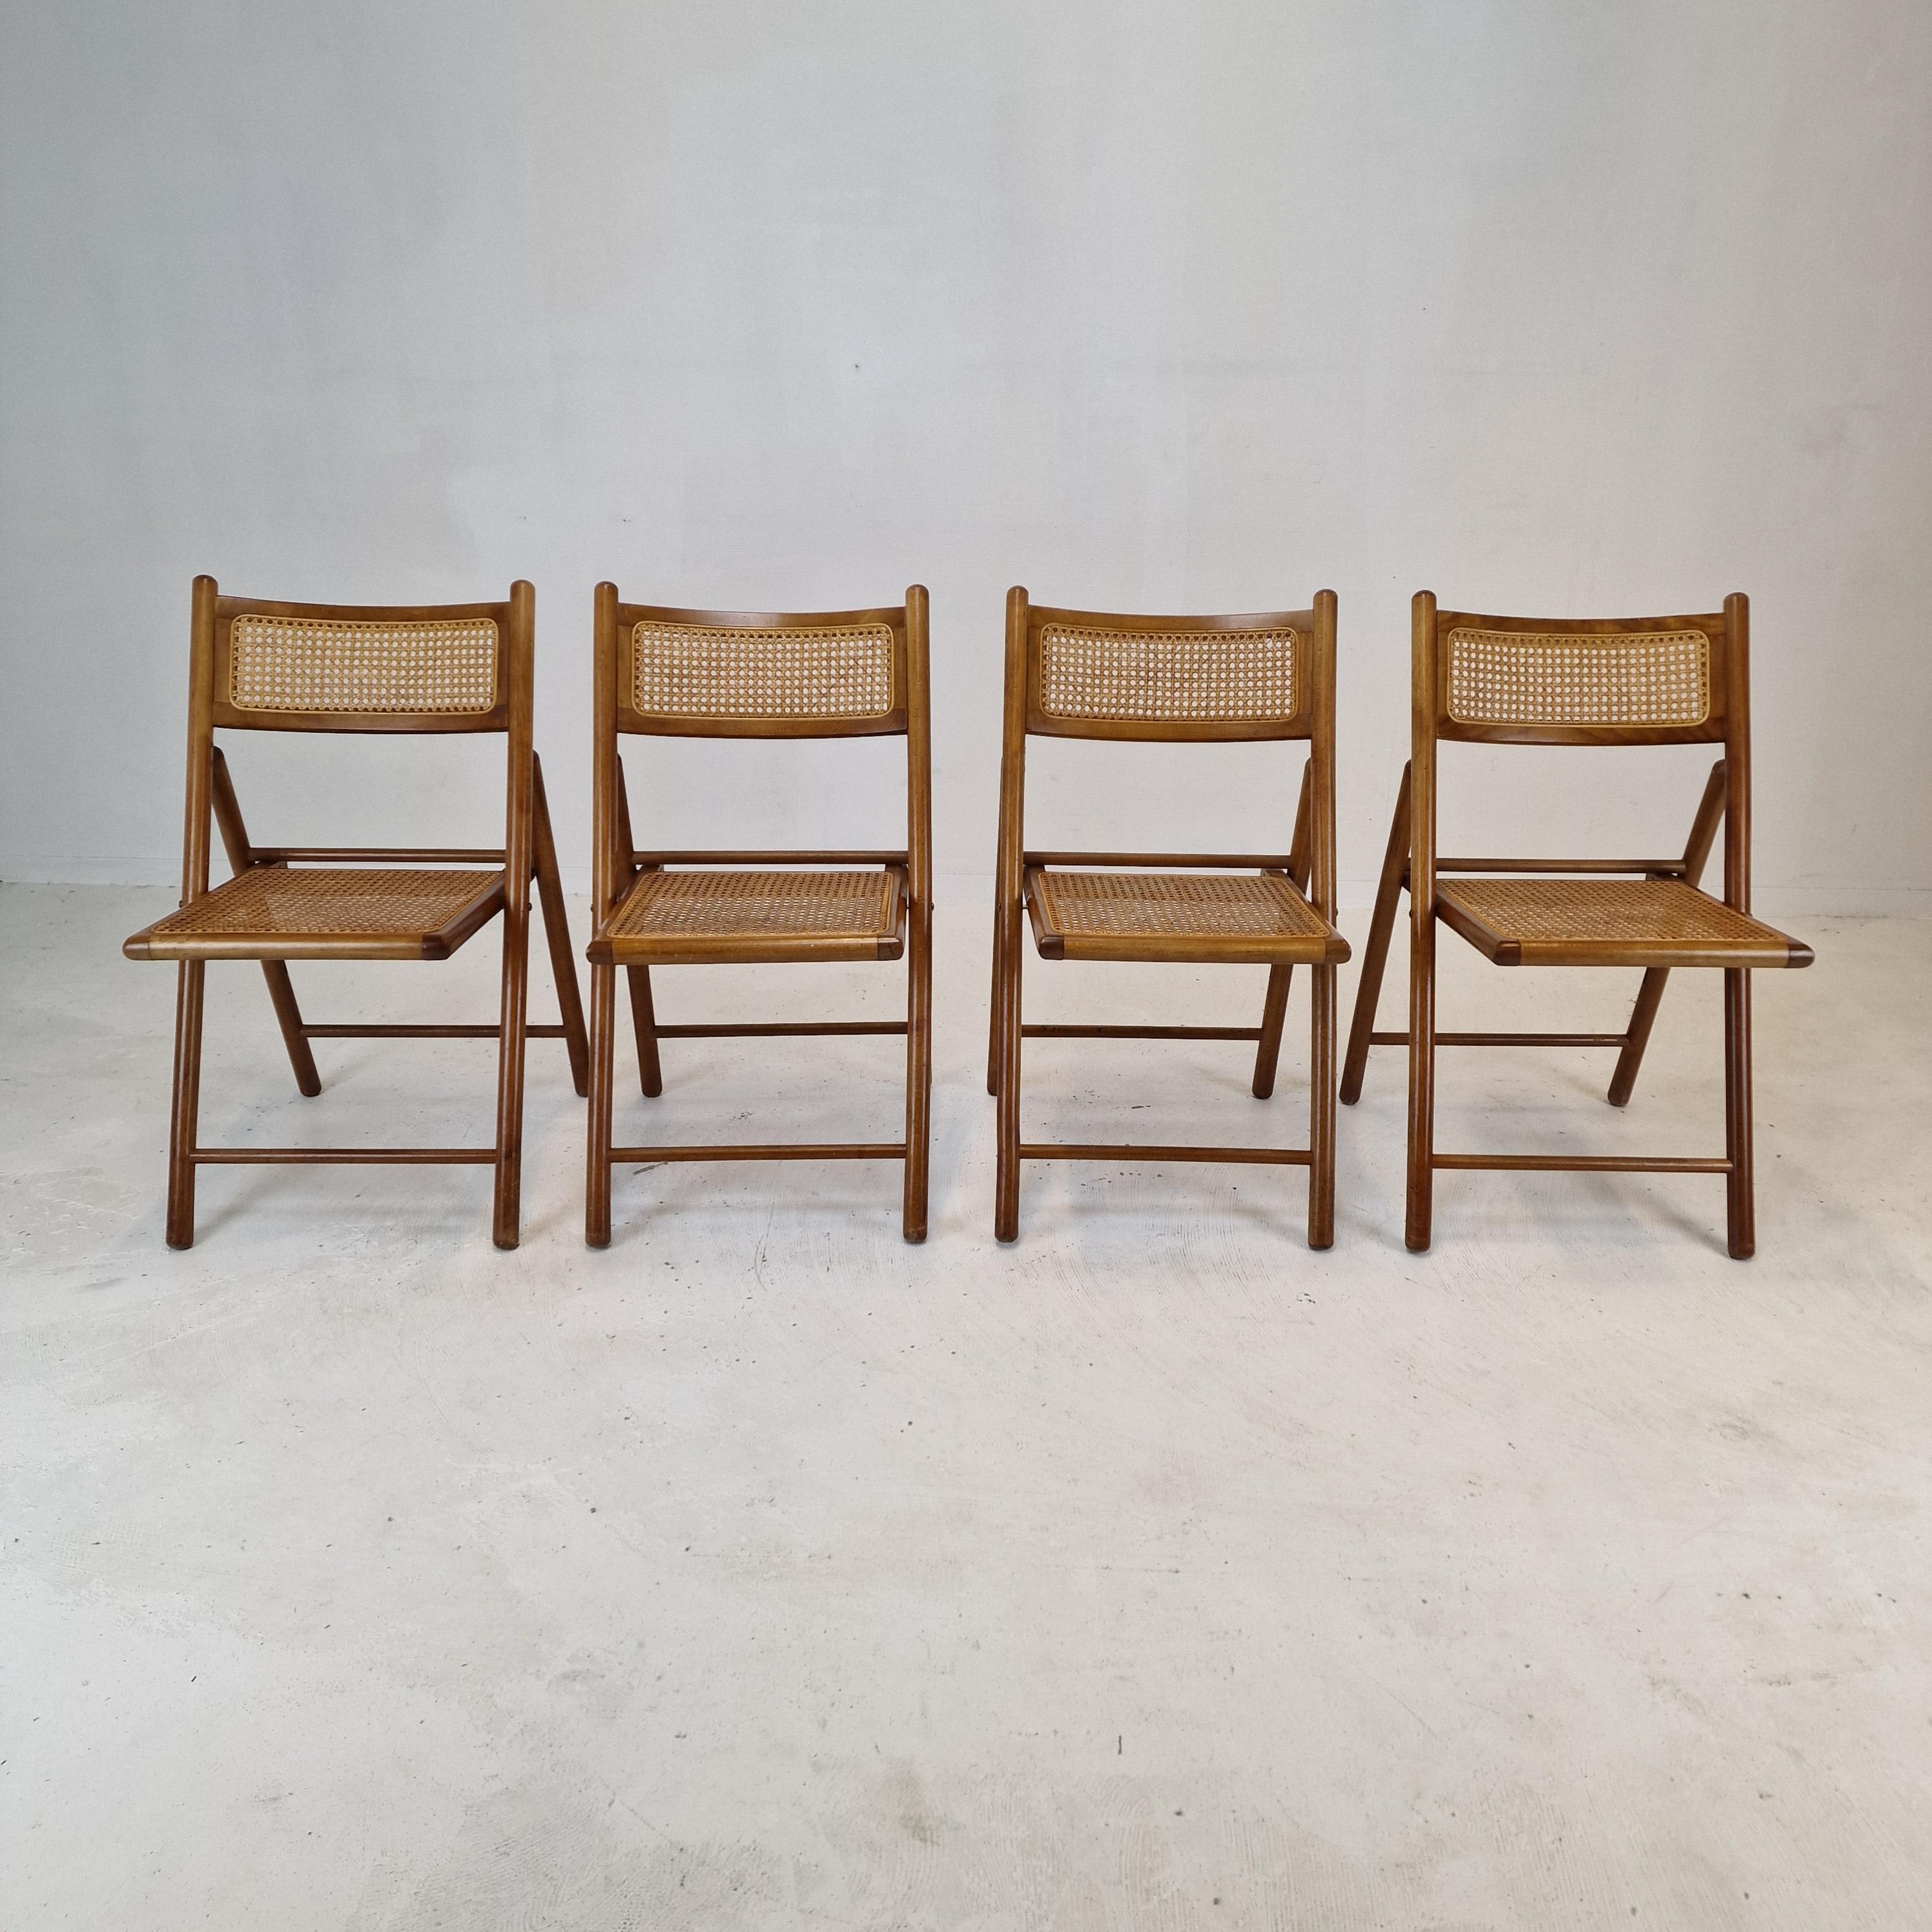 Very nice set of 4 Italian folding chairs, fabricated in the 1980s.

The seating of the chairs are made of wicker.
The structure is made of solid wood.

The chairs are in good vintage condition.

We work with professional packers and